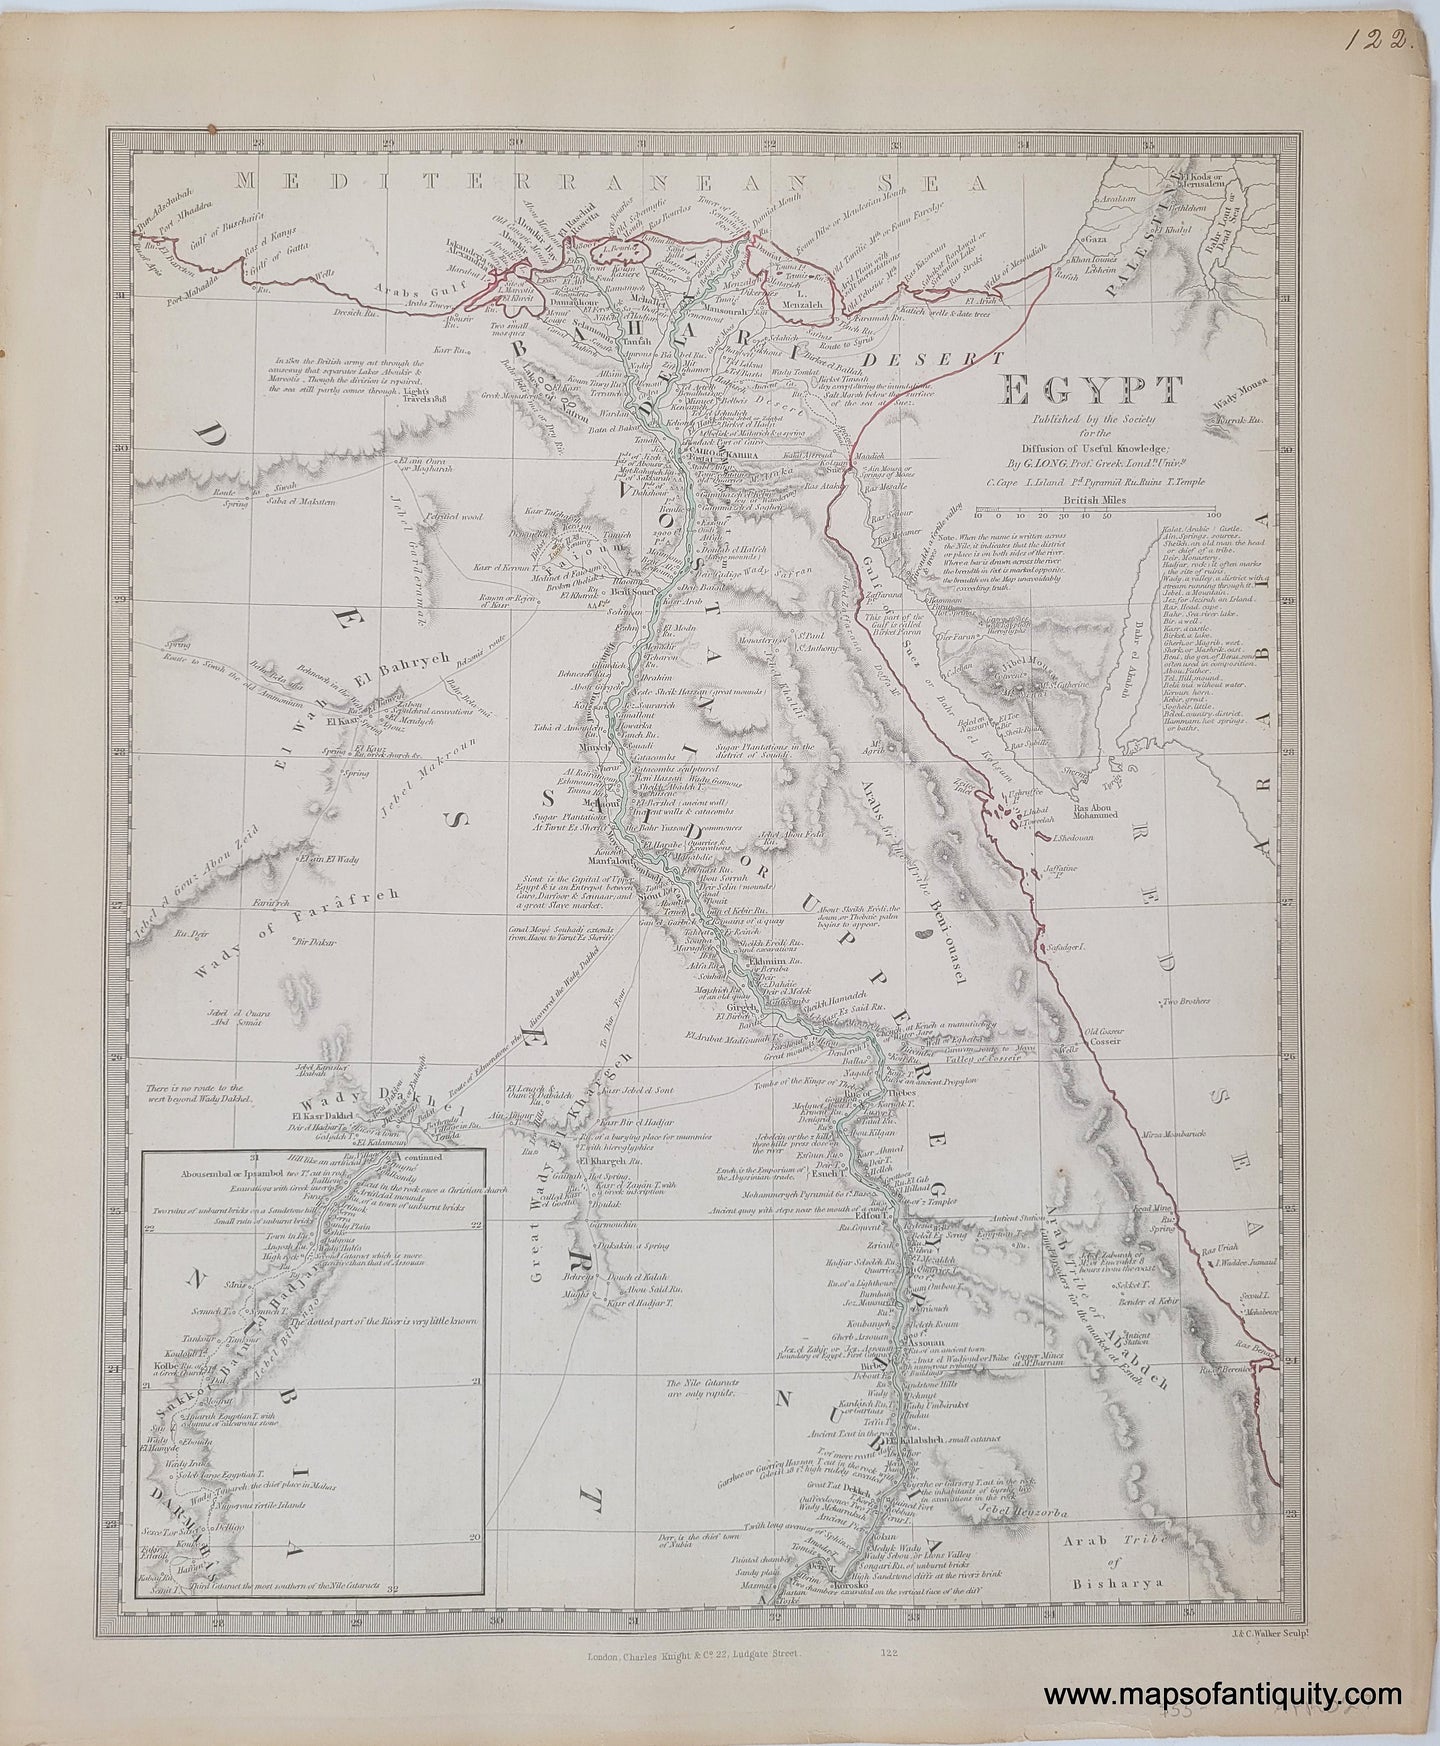 1850 - Egypt, Published by the Society for the Diffusion of Useful Knowledge. - Antique Map